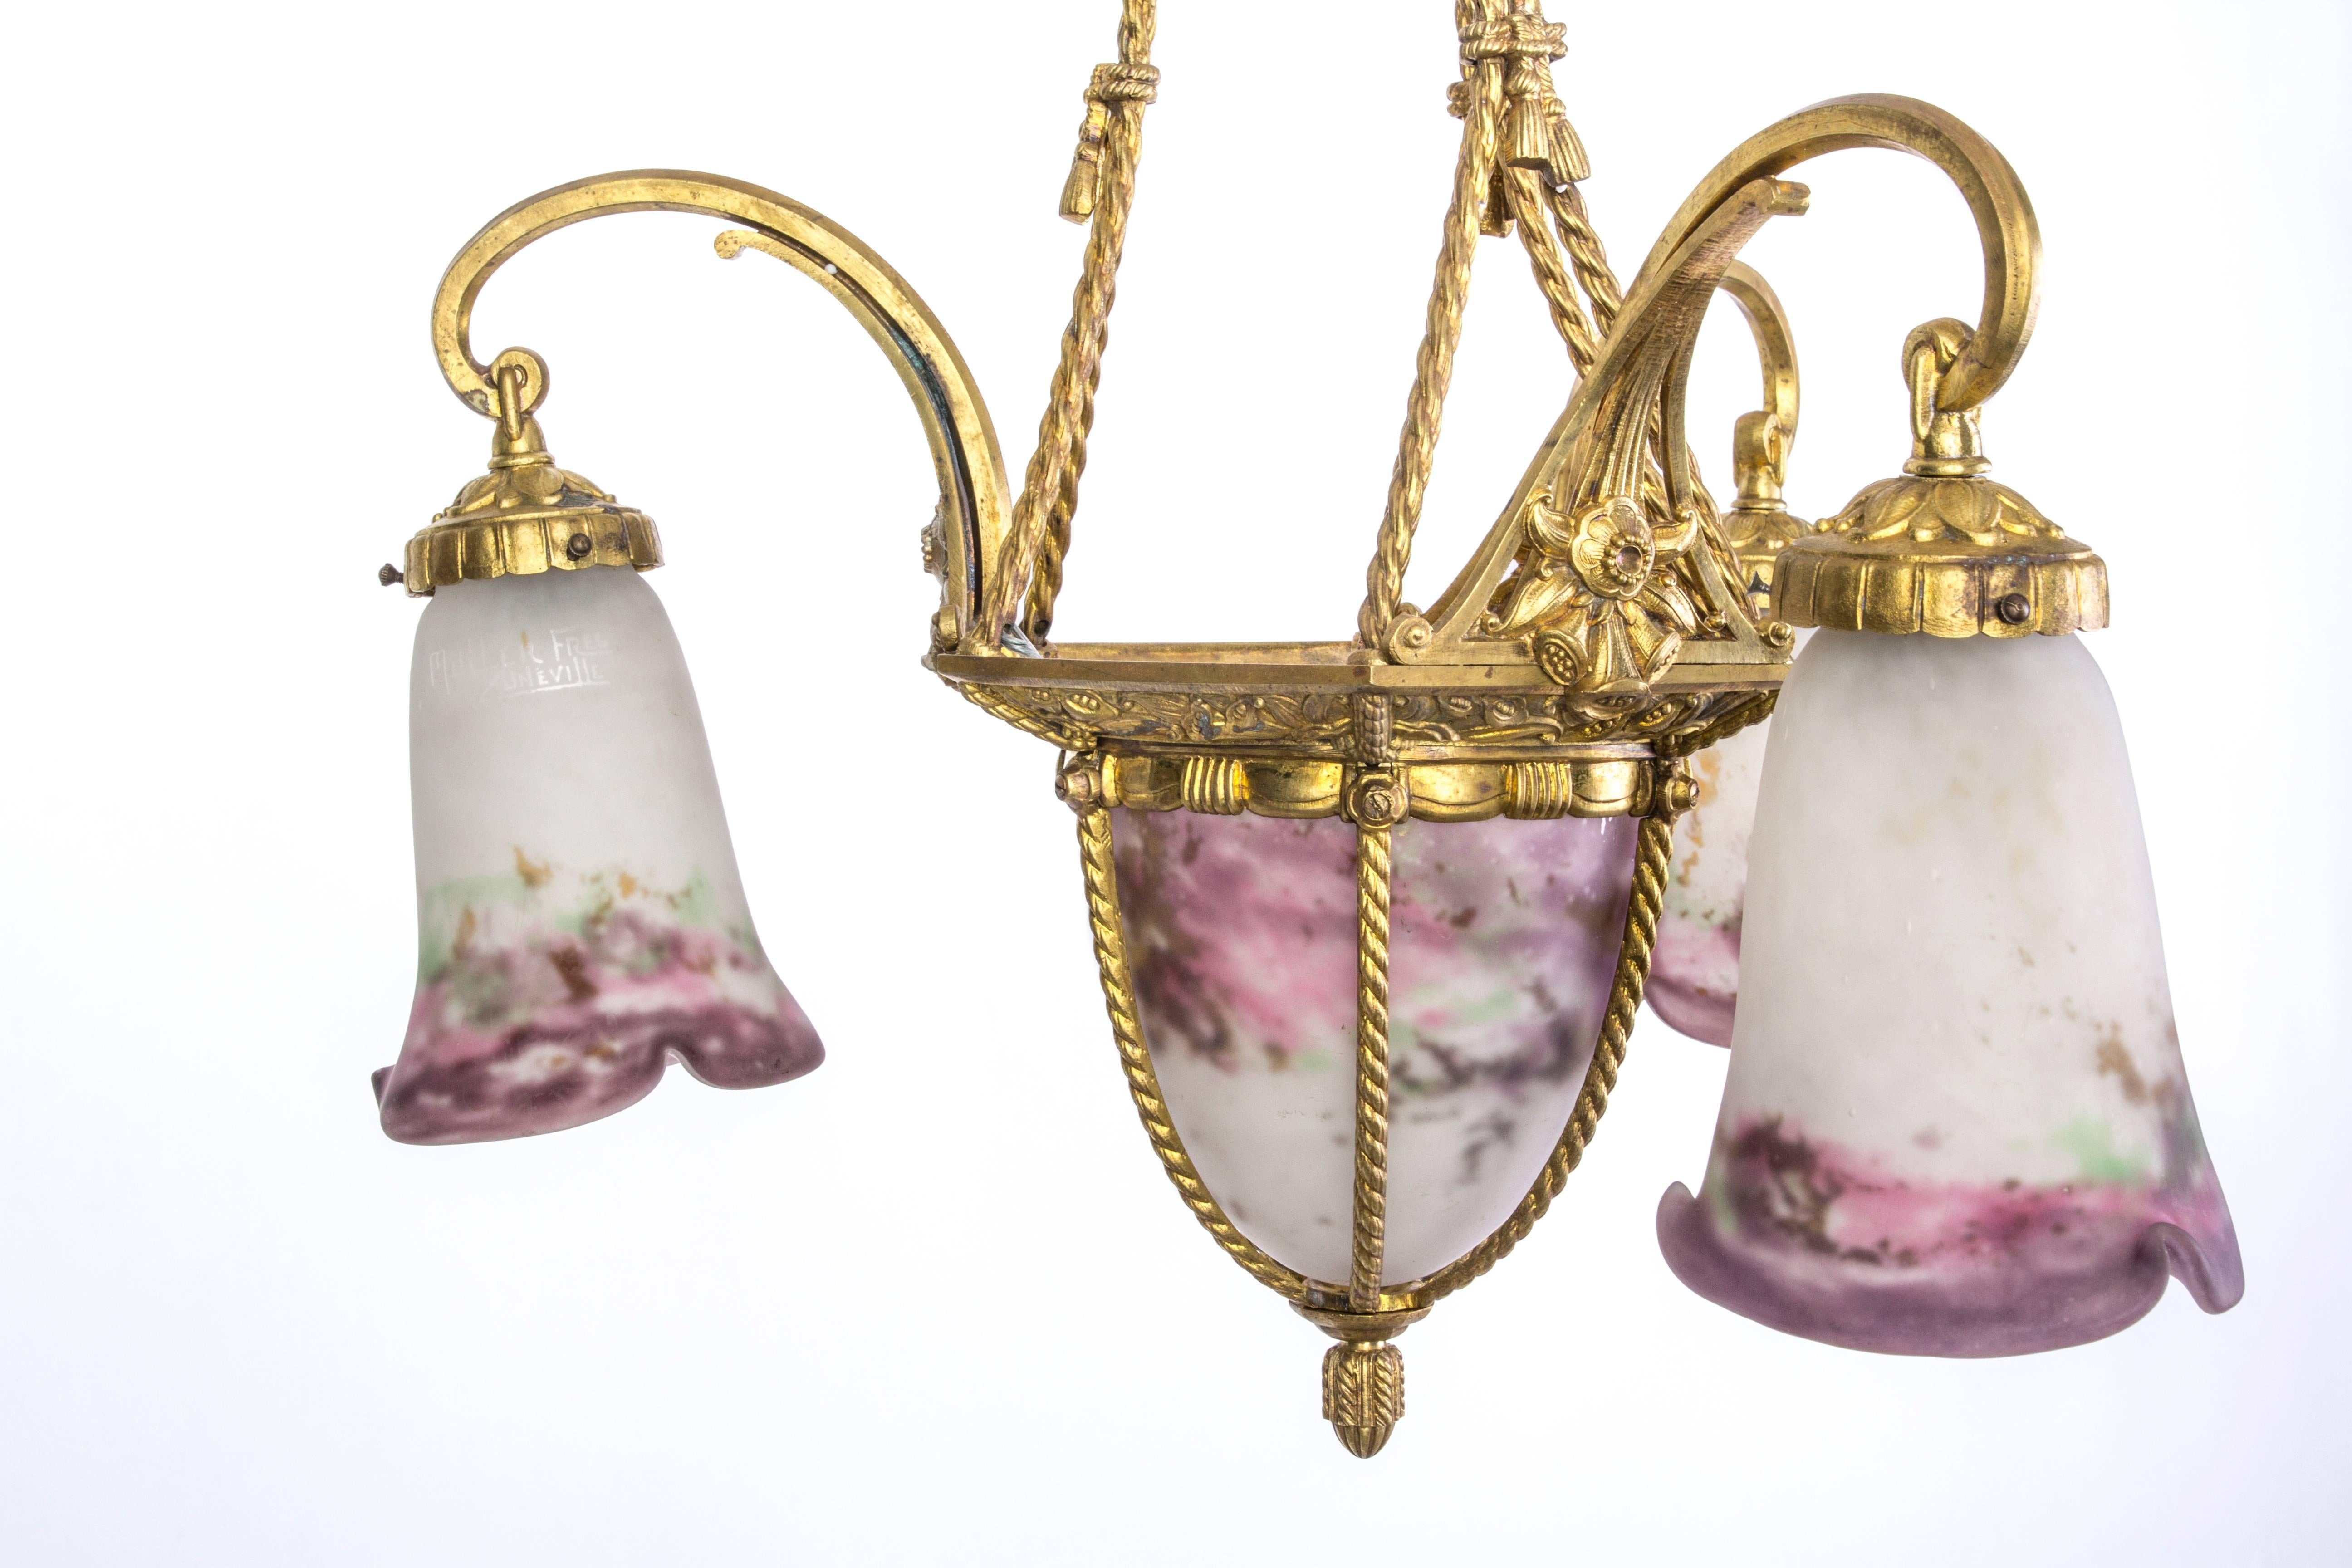 This sensational early French Art Deco chandelier was designed and signed by Muller Frères. It features a gilt bronze base in brass with stylized floral and chain detailing. It has an obus and (3) glass frosted glass shades with a painted floral